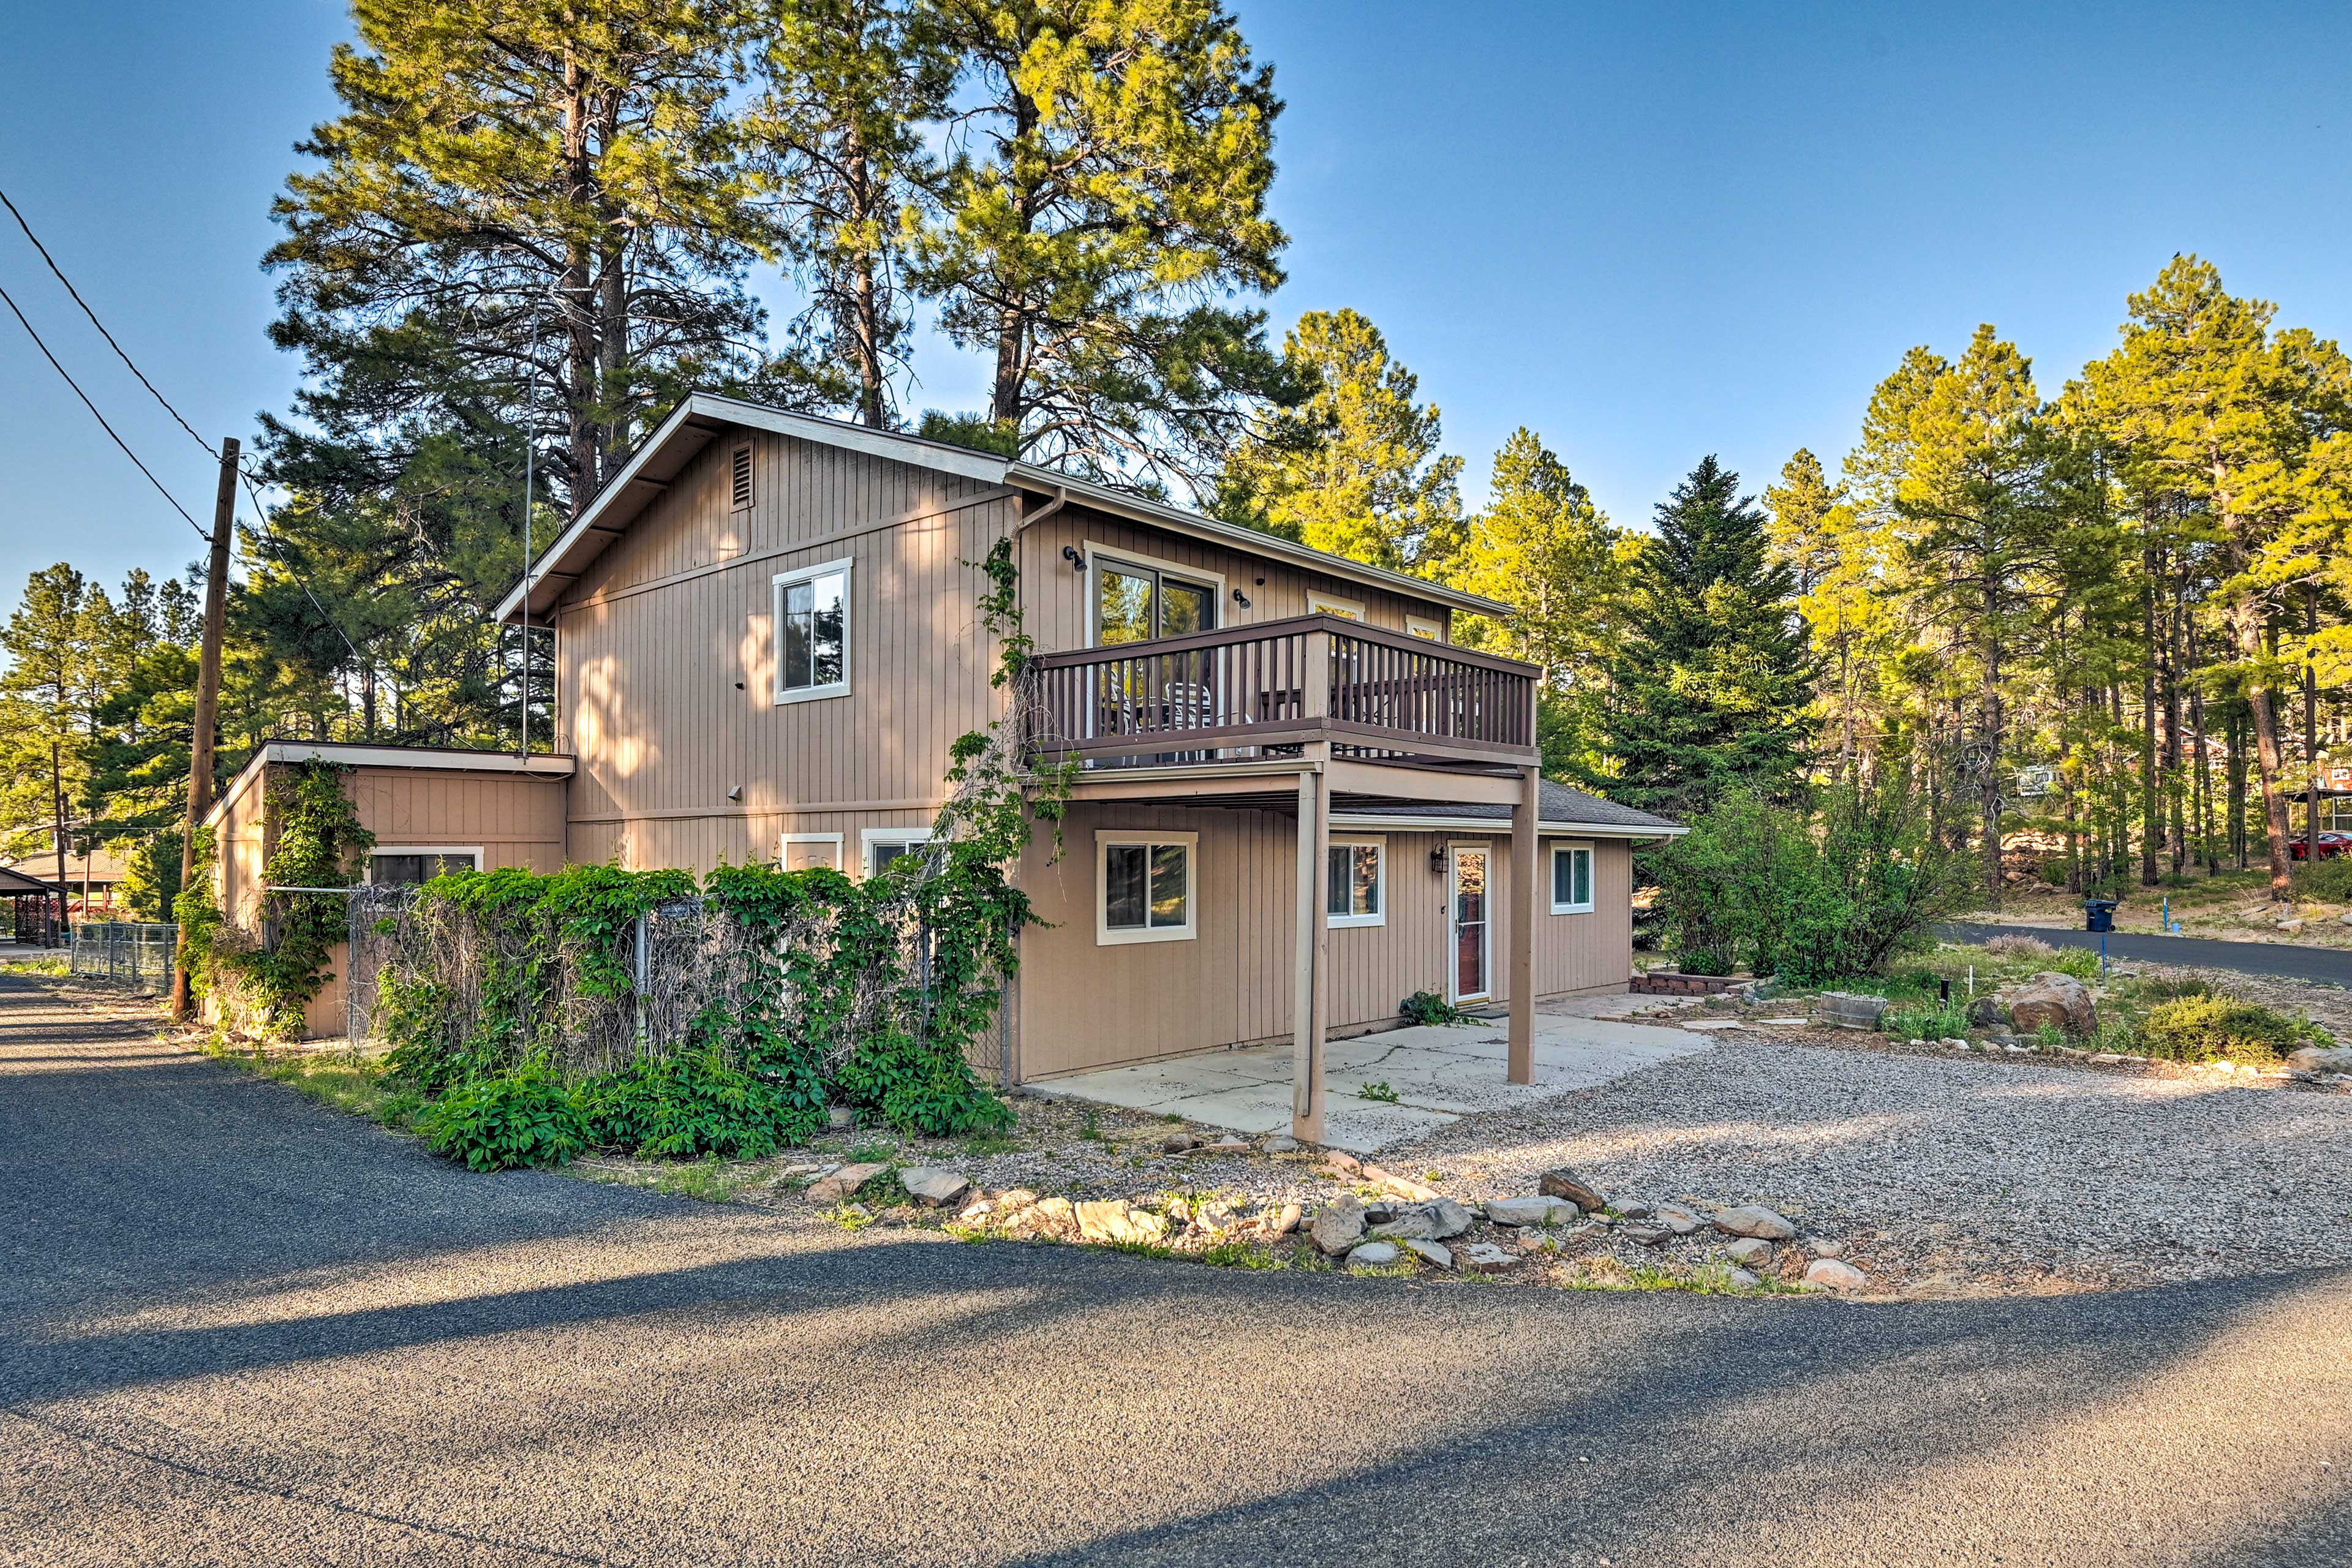 Home Exterior | Wireless Internet | On the Edge of Coconino National Forrest